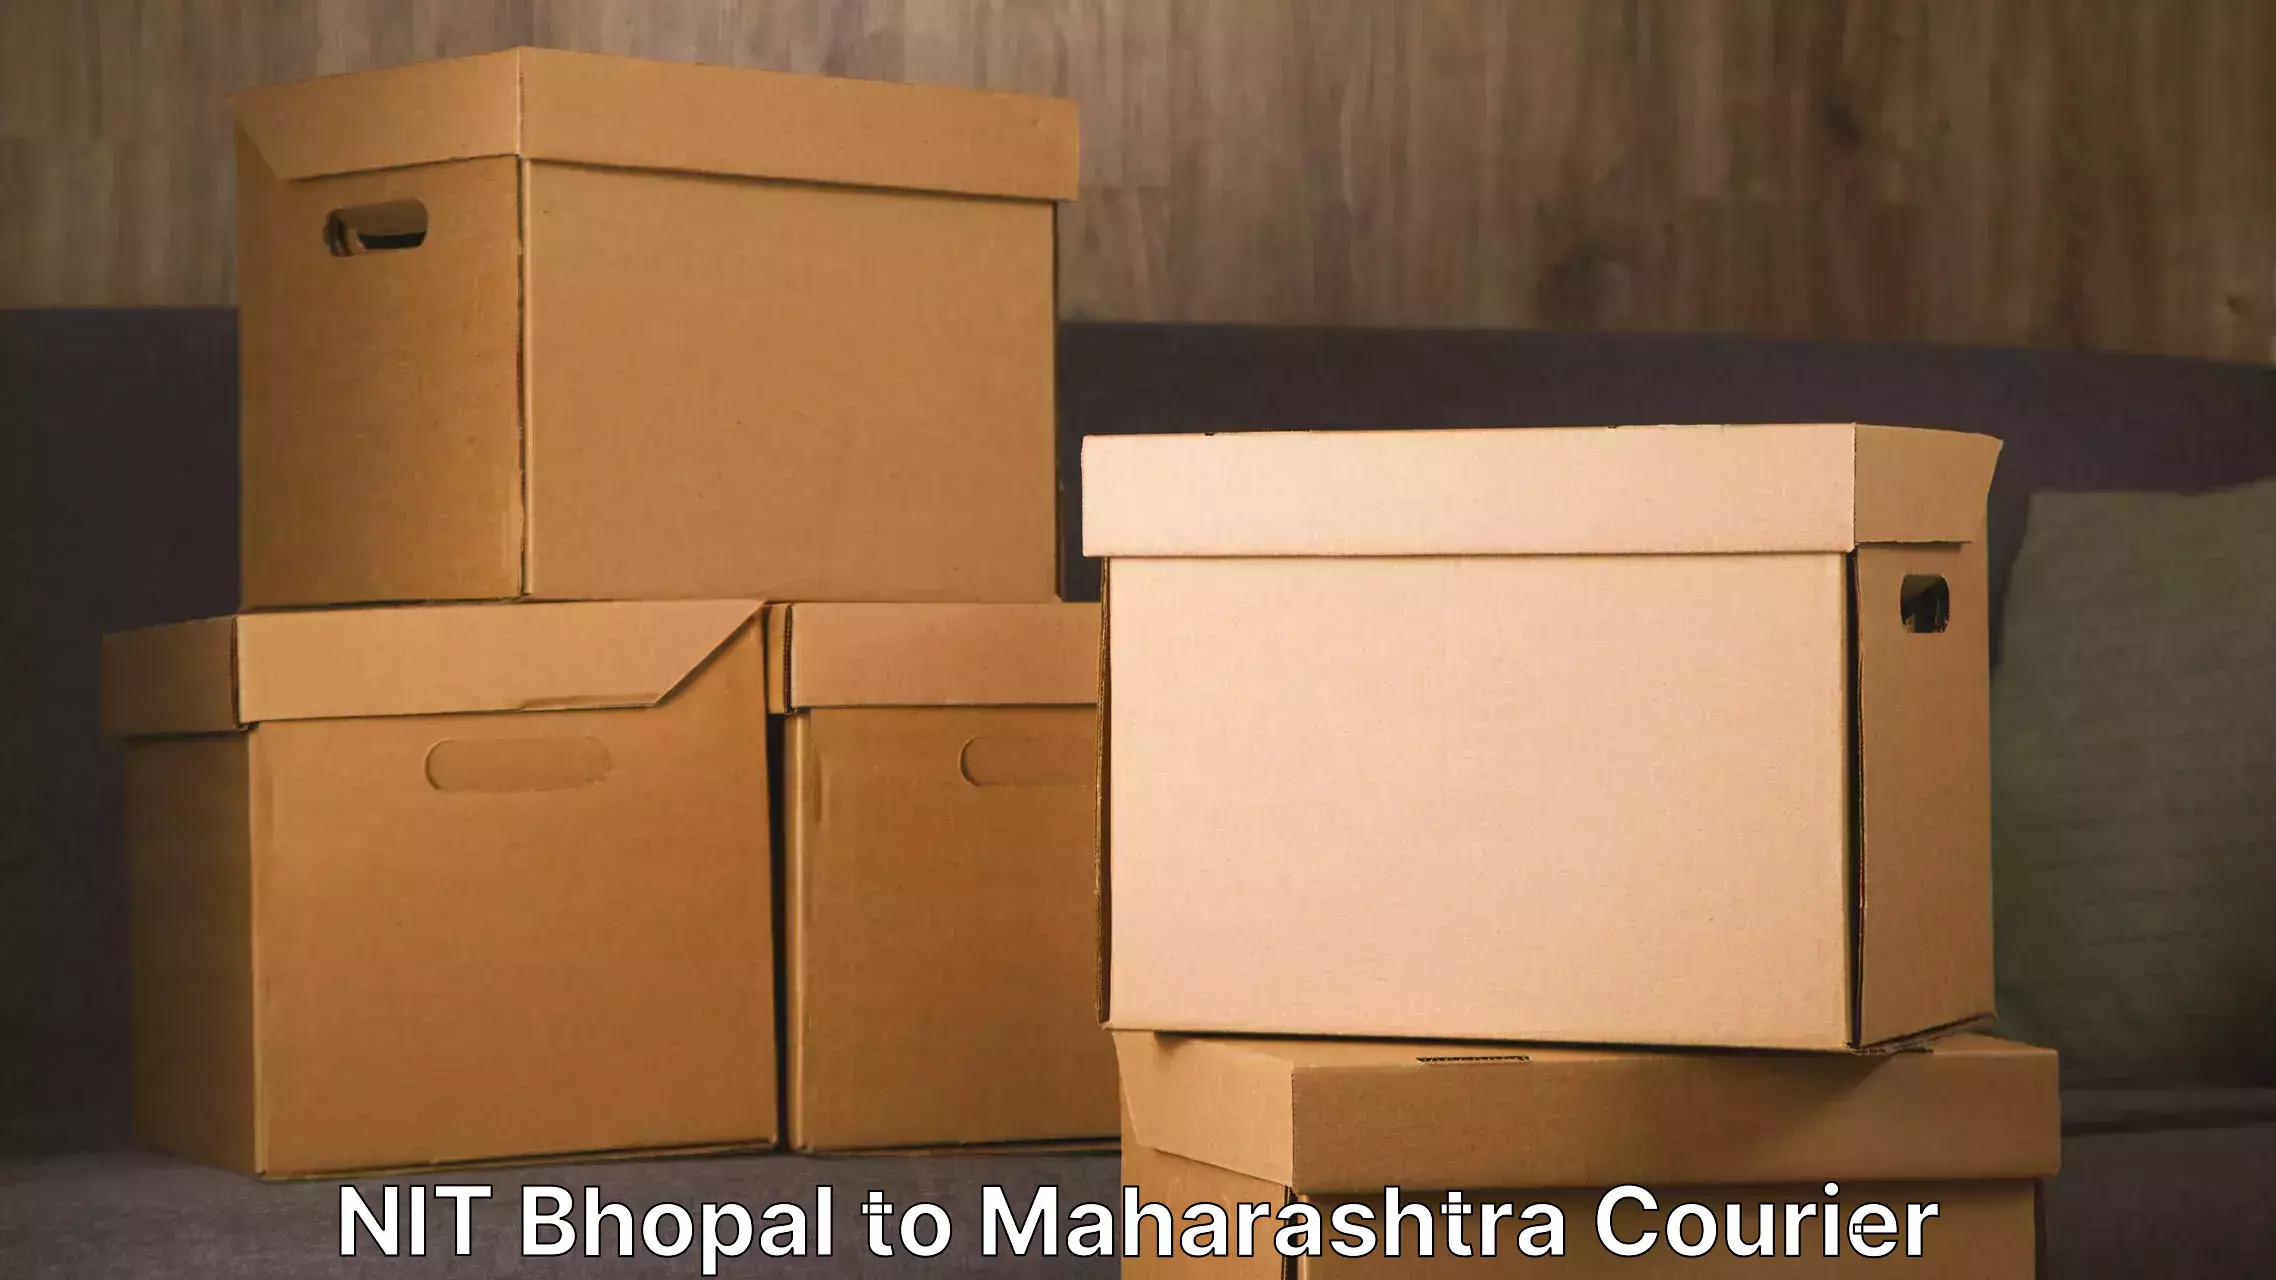 Professional home movers in NIT Bhopal to Ballarpur